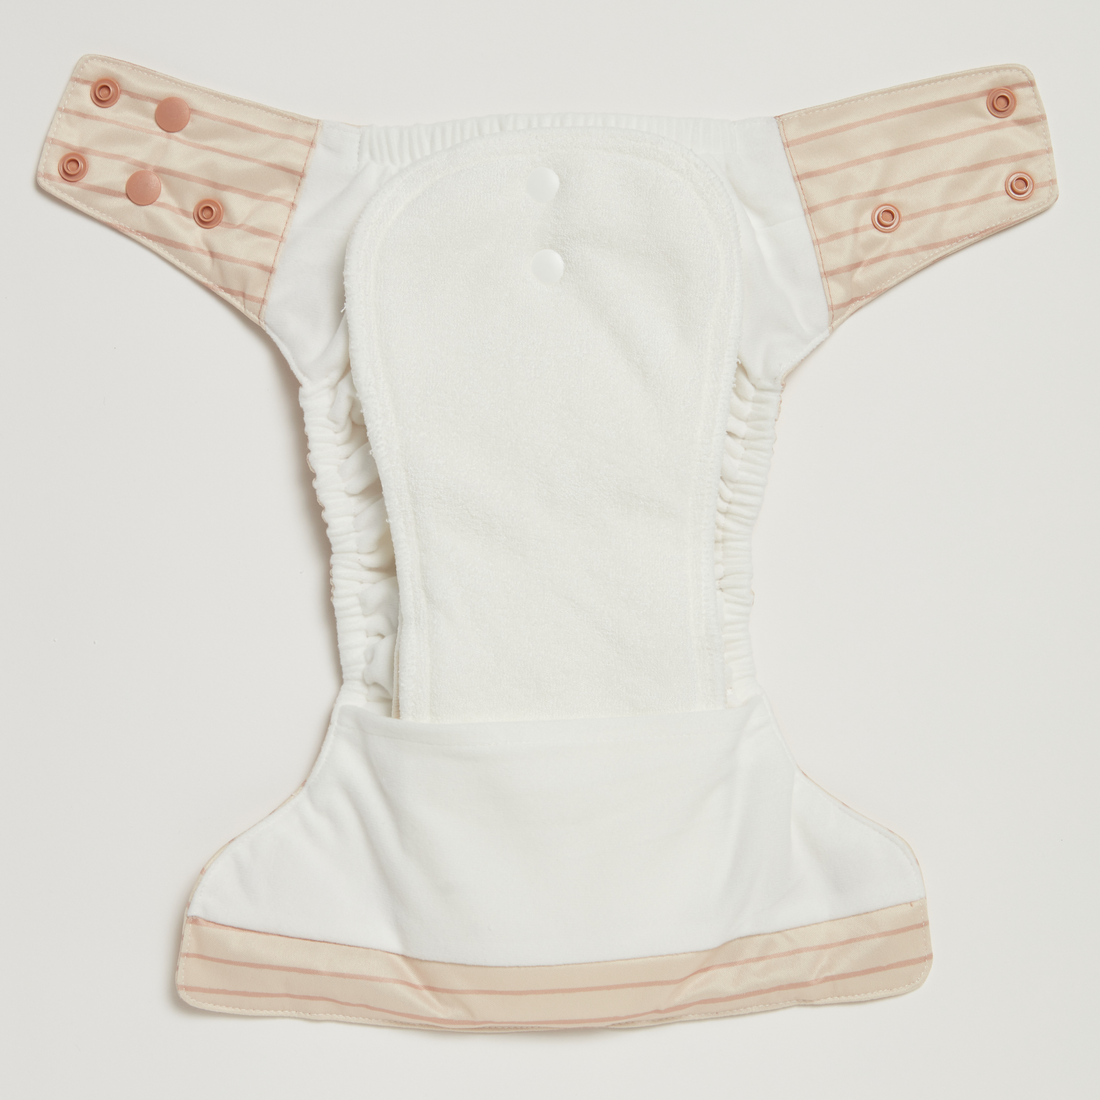 Painted Stripe 2.0 Modern Cloth Nappy